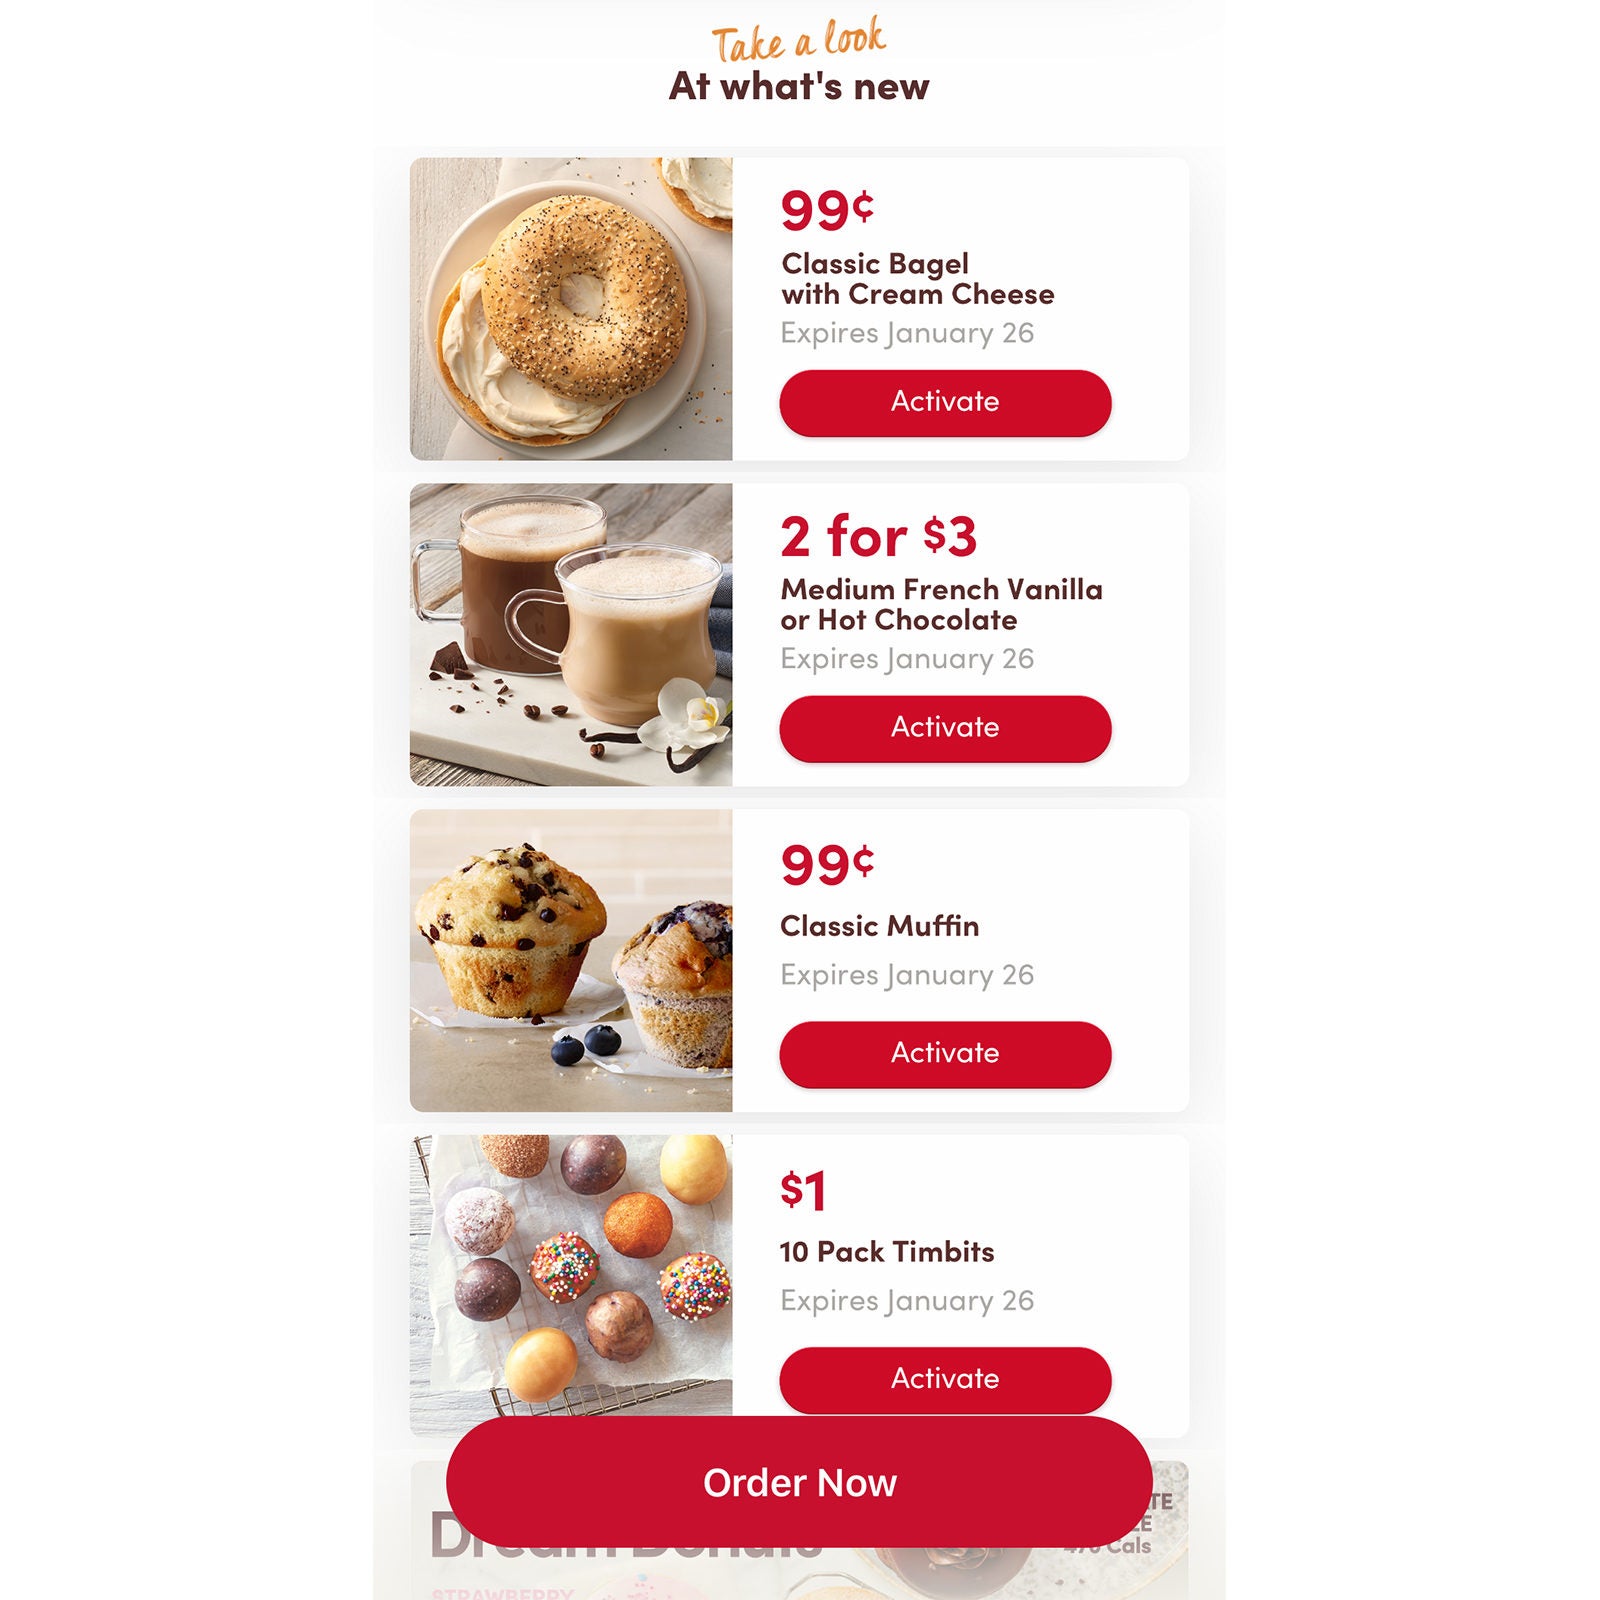 44 Best Images Frys App Digital Coupons - Creative Couponing « Saving Cash in Anchorage, One Deal at ...